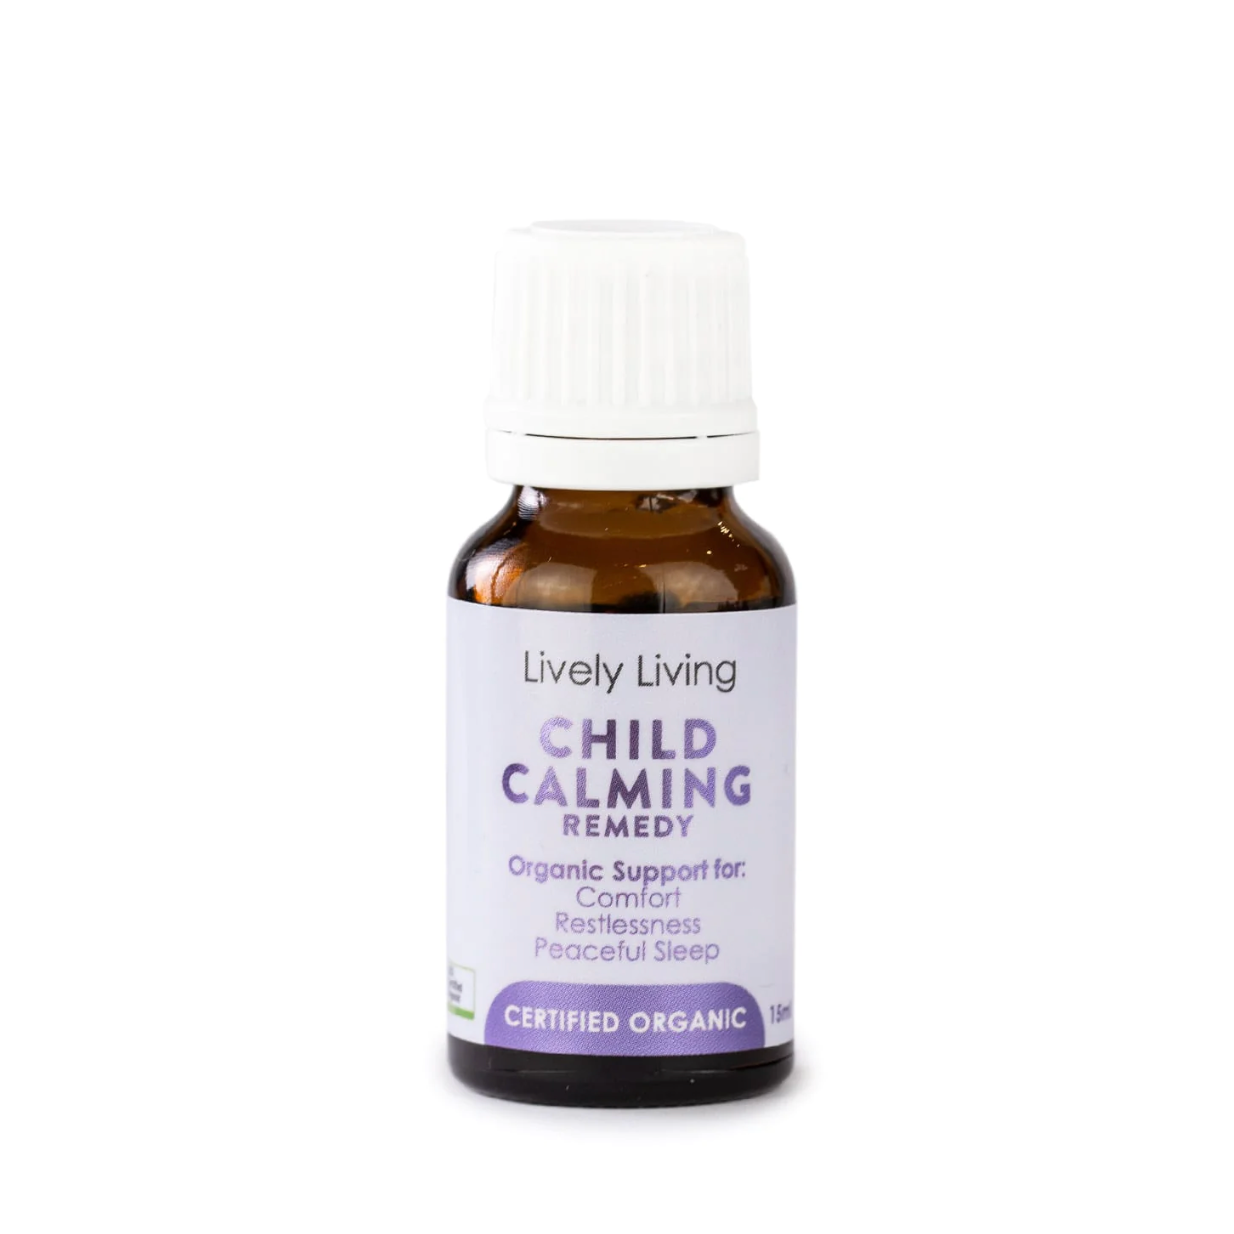 Lively Living Organic Essential Oil Blend 15ml, Child Calming